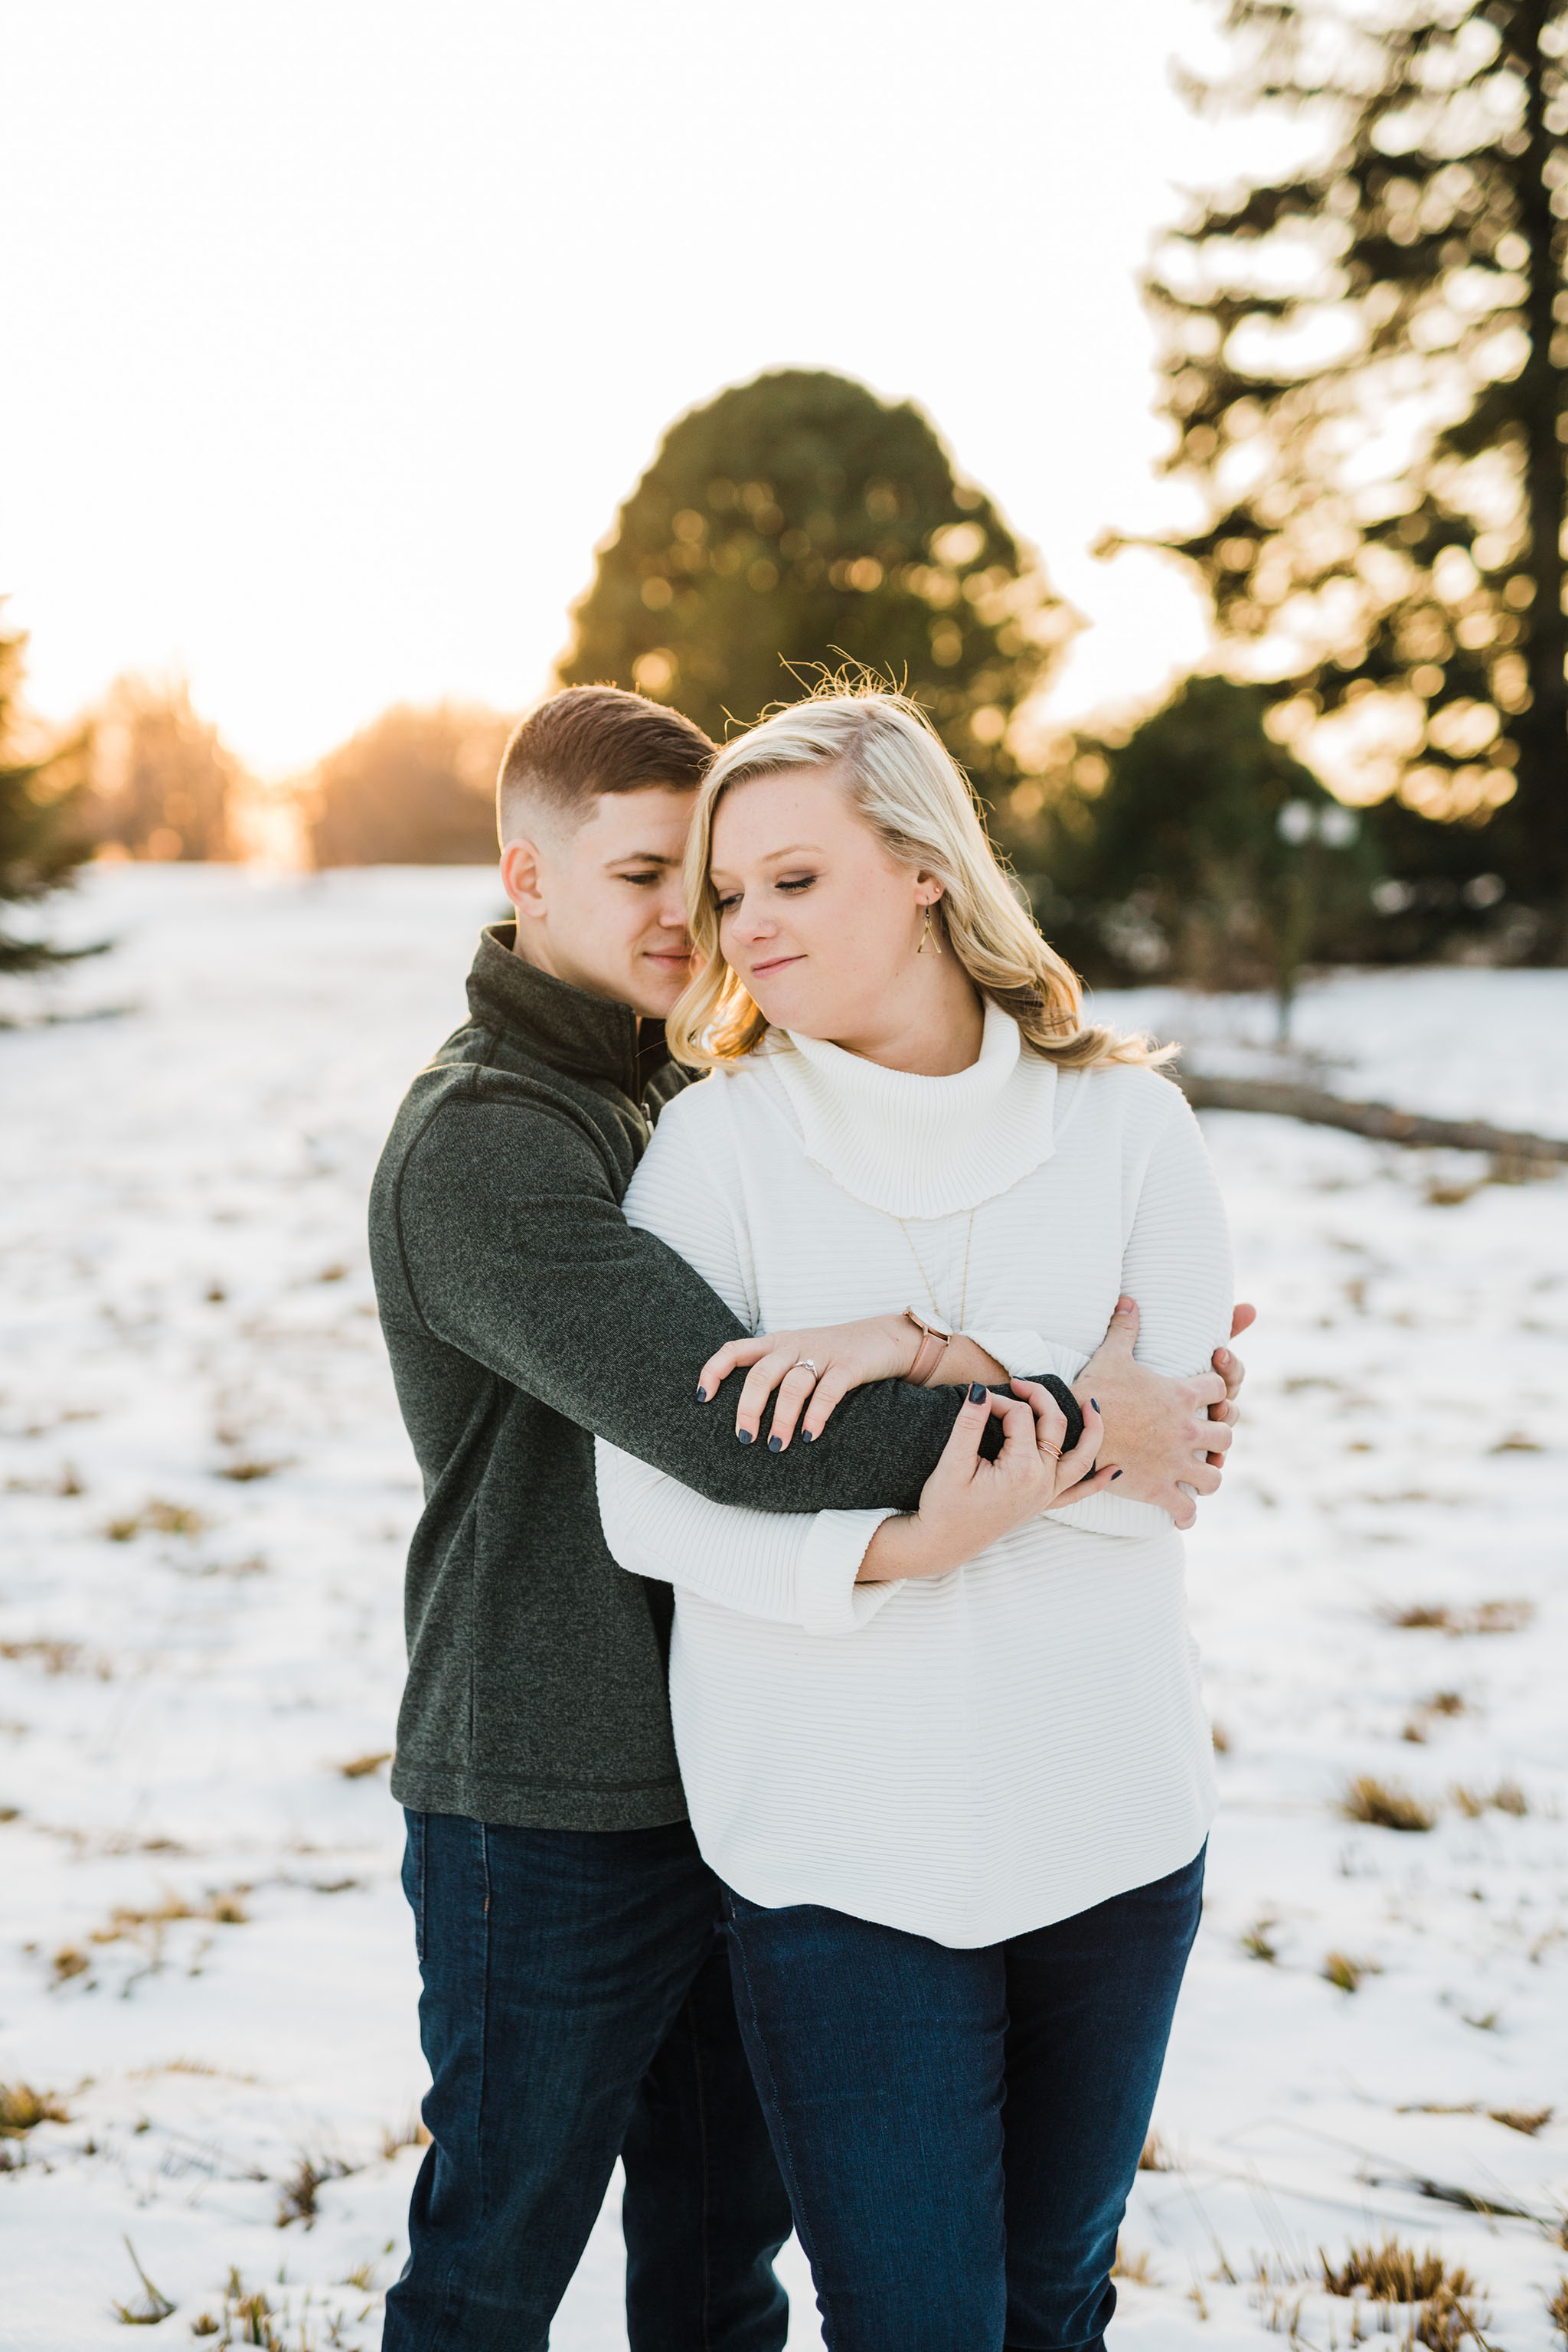 Alex and Hannahs Downtown Wooster Engagement Session | Wooster Ohio Wedding and Engagement Photographer | Tiffany Reiff Designs and Photography